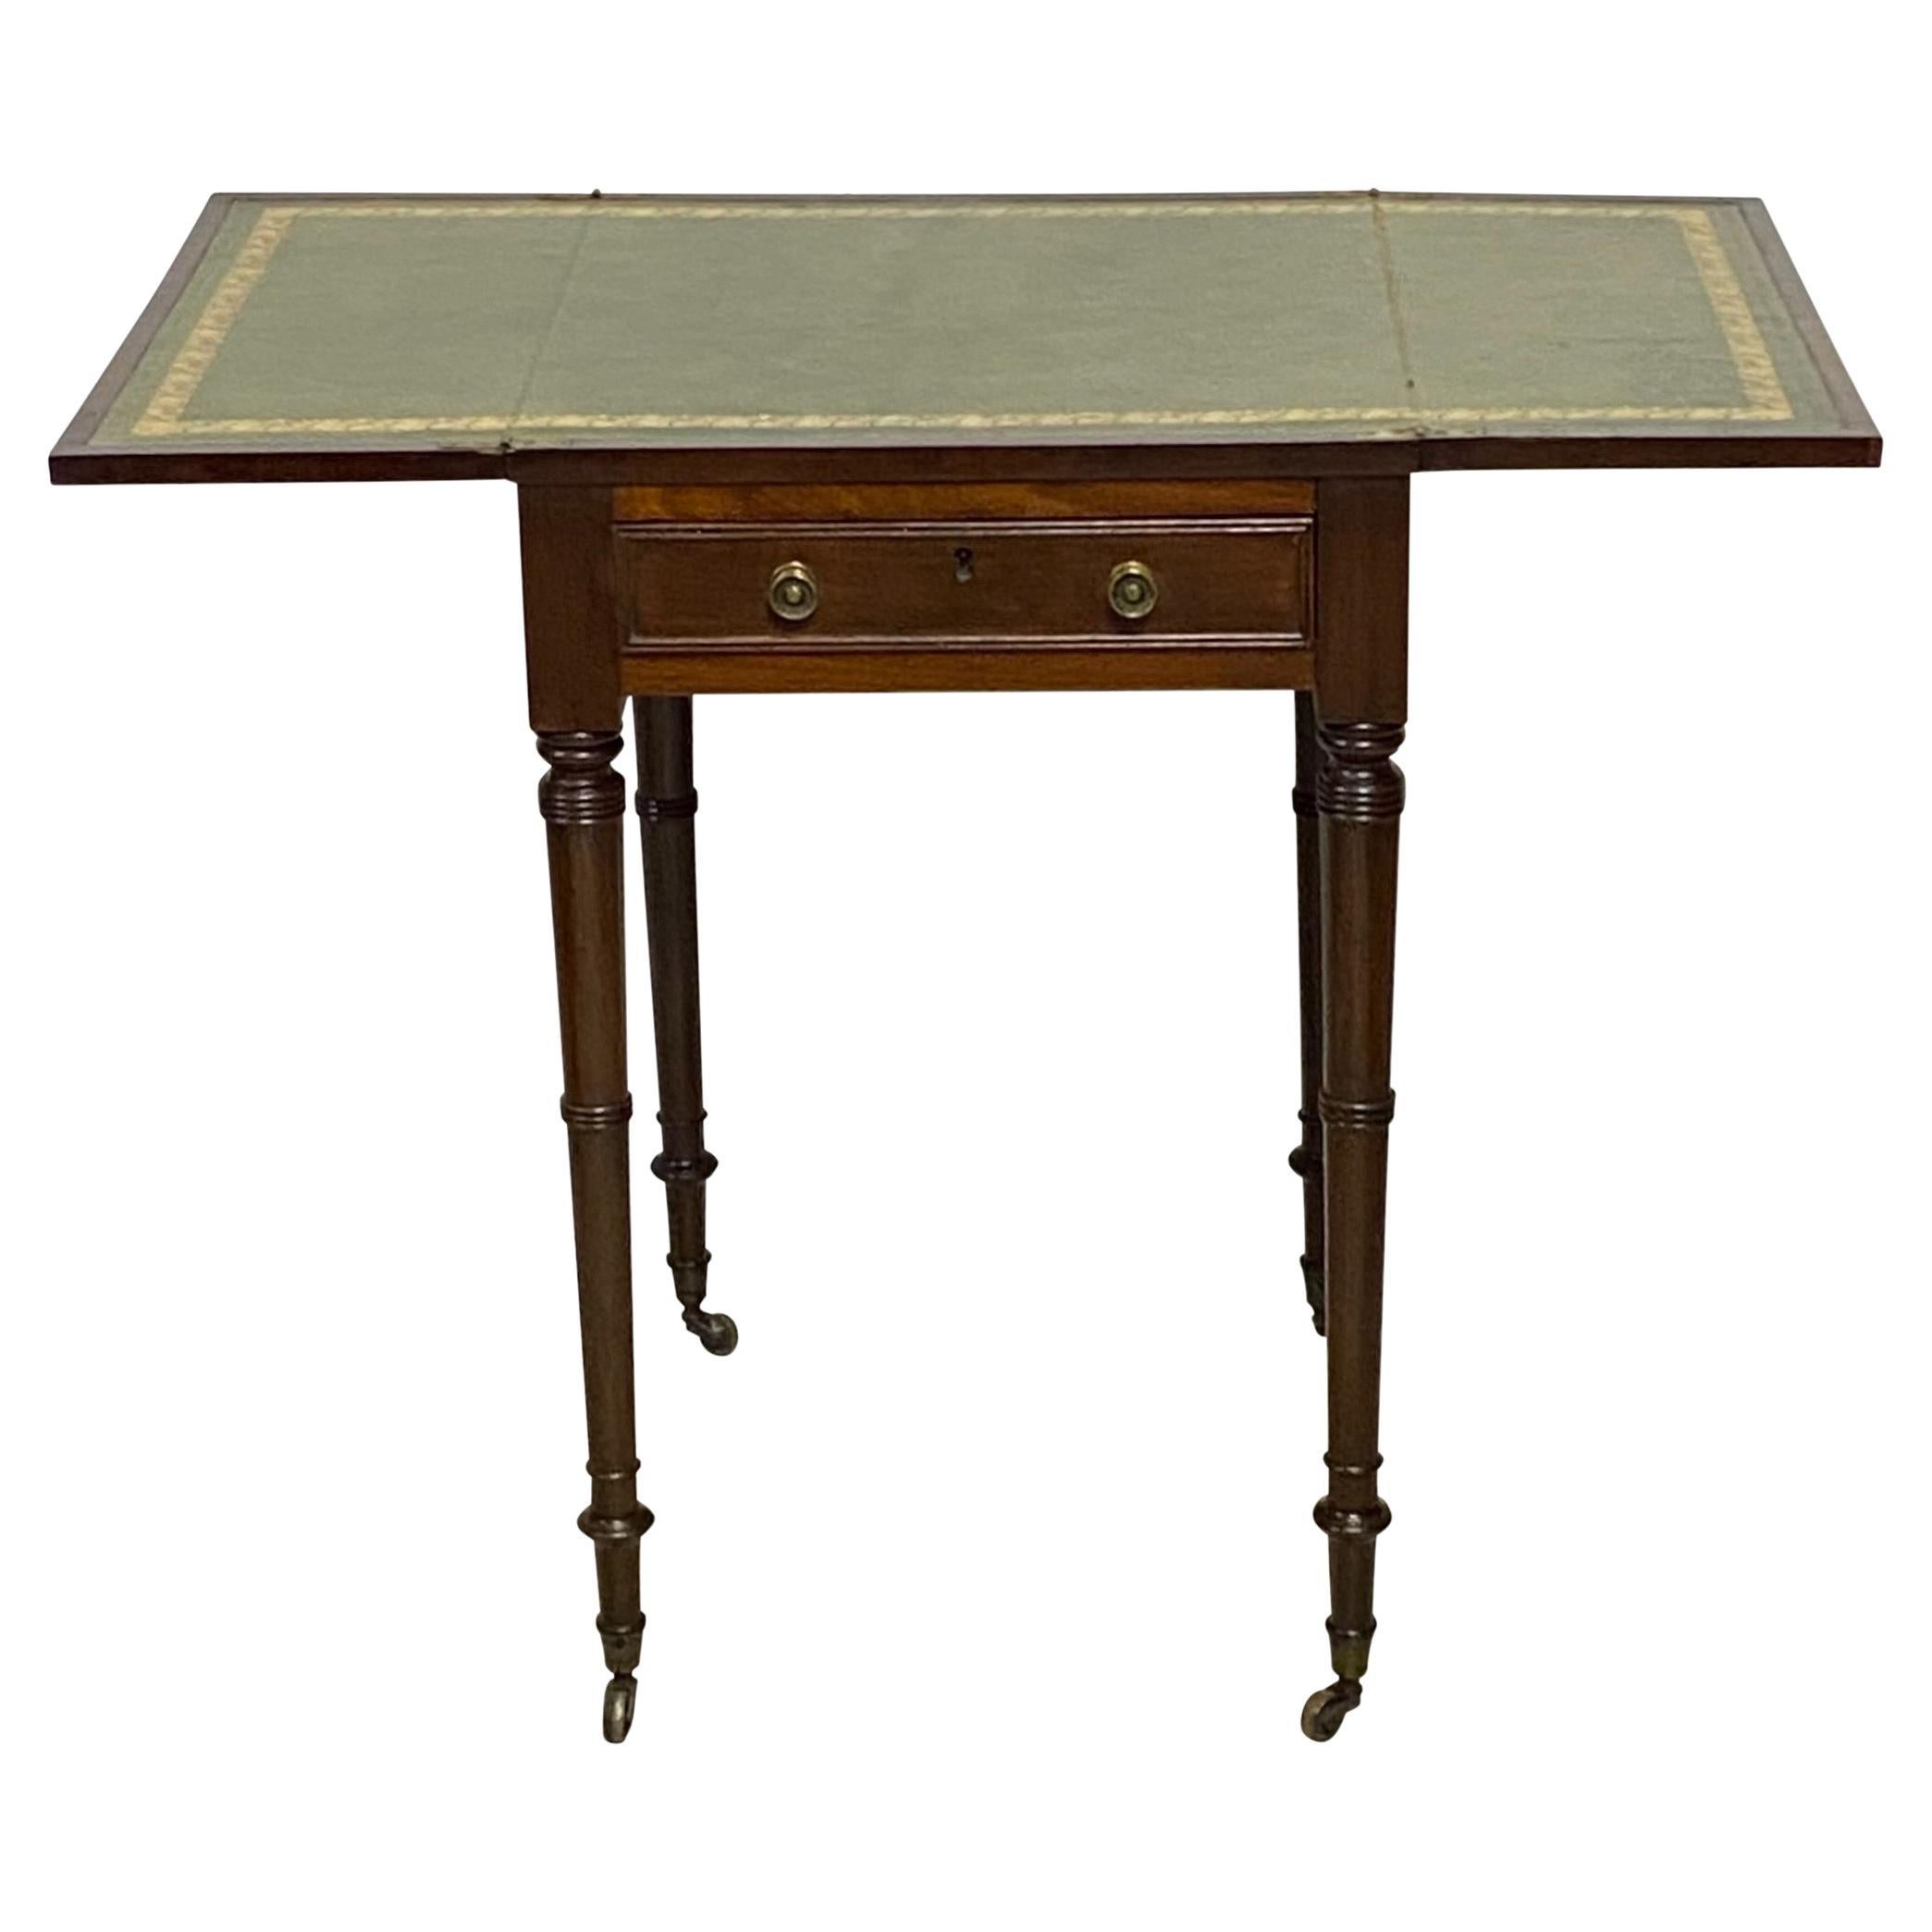 Regency Mahogany and Leather Side Table, English Early 19th Century For Sale